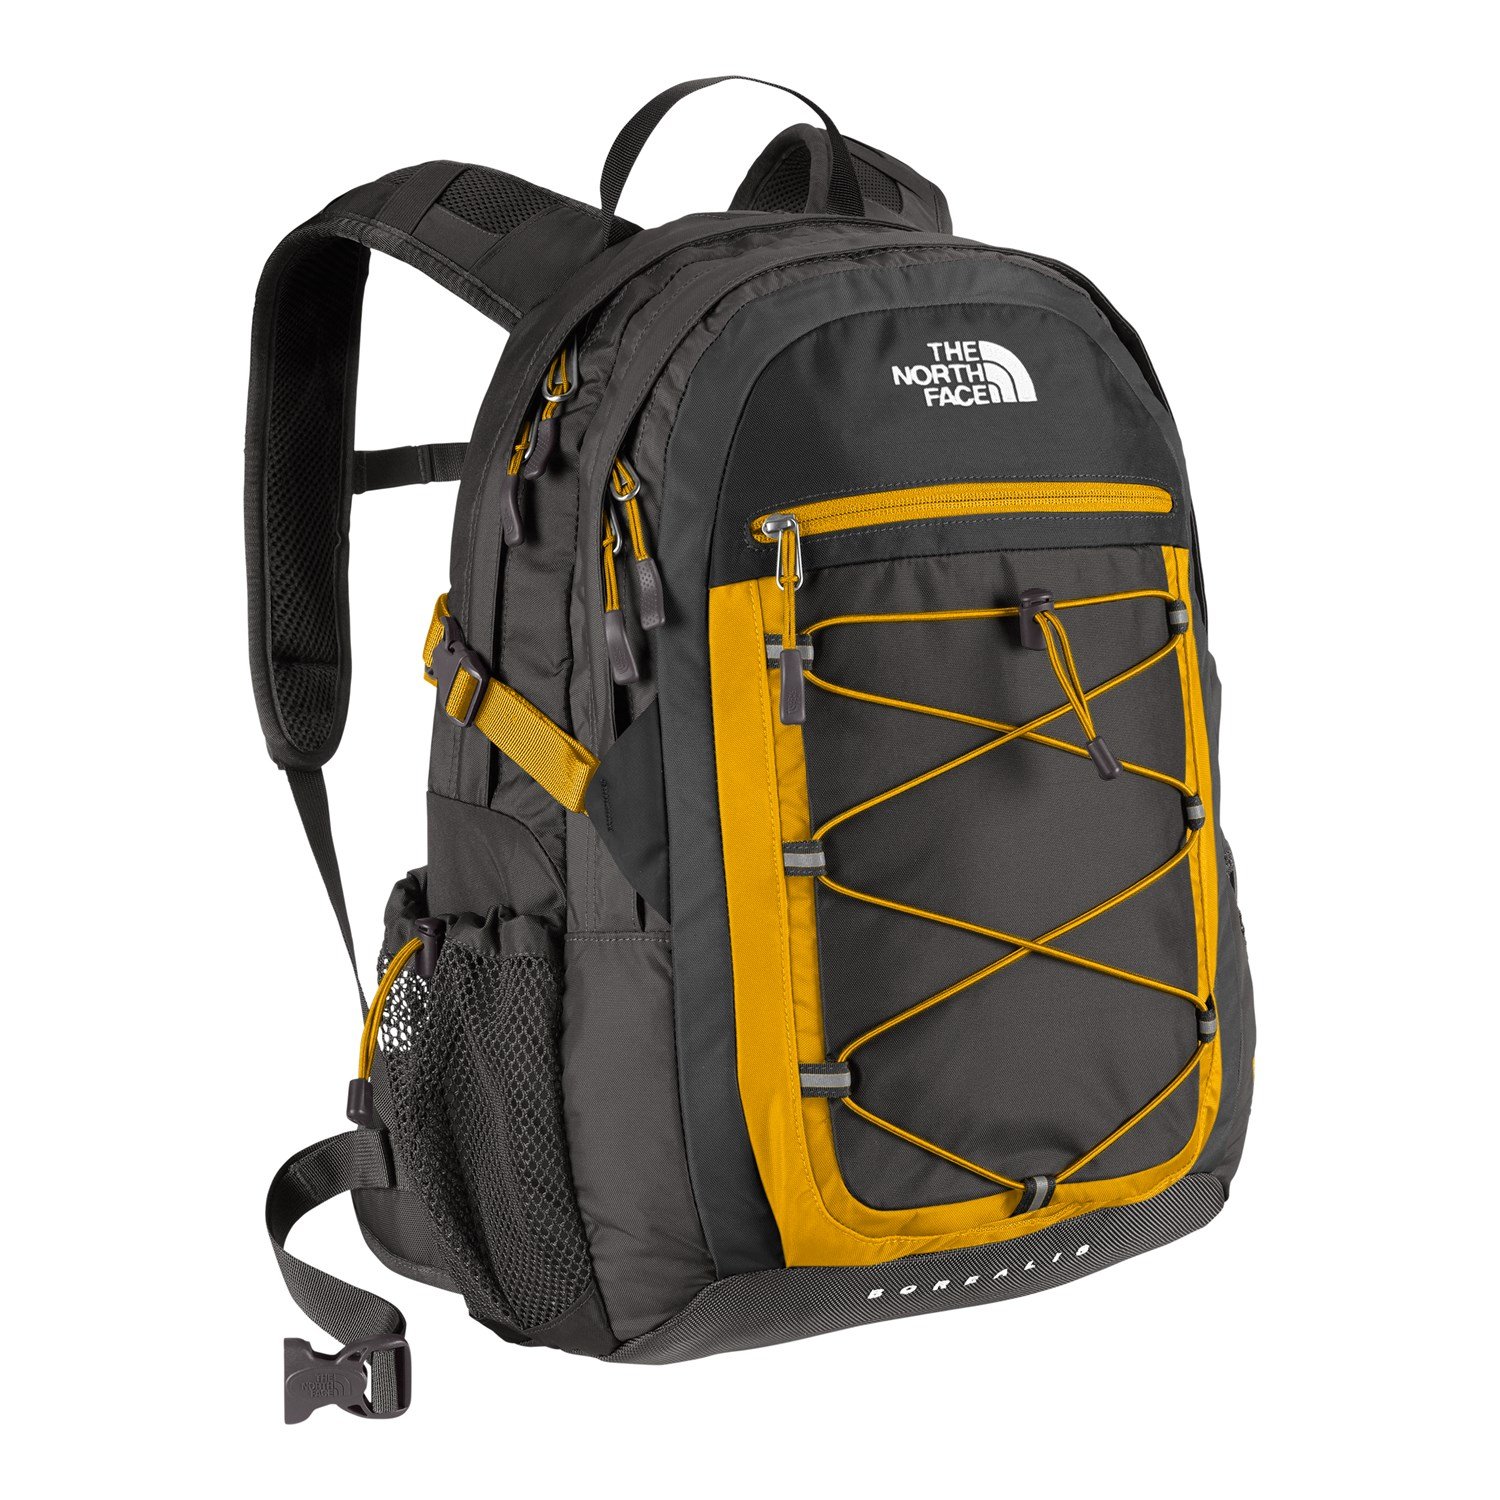 Materialisme alcohol Eervol The North Face Borealis Backpack | evo